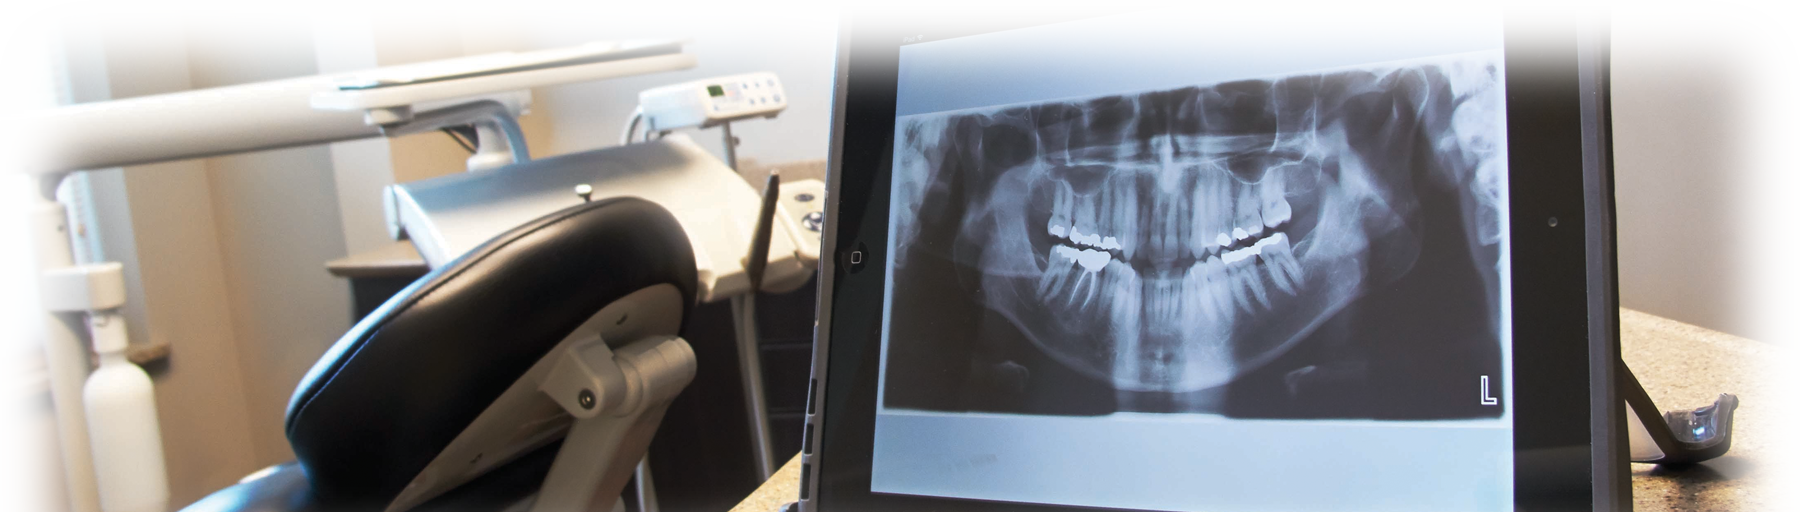 X-Ray And Digital Imaging